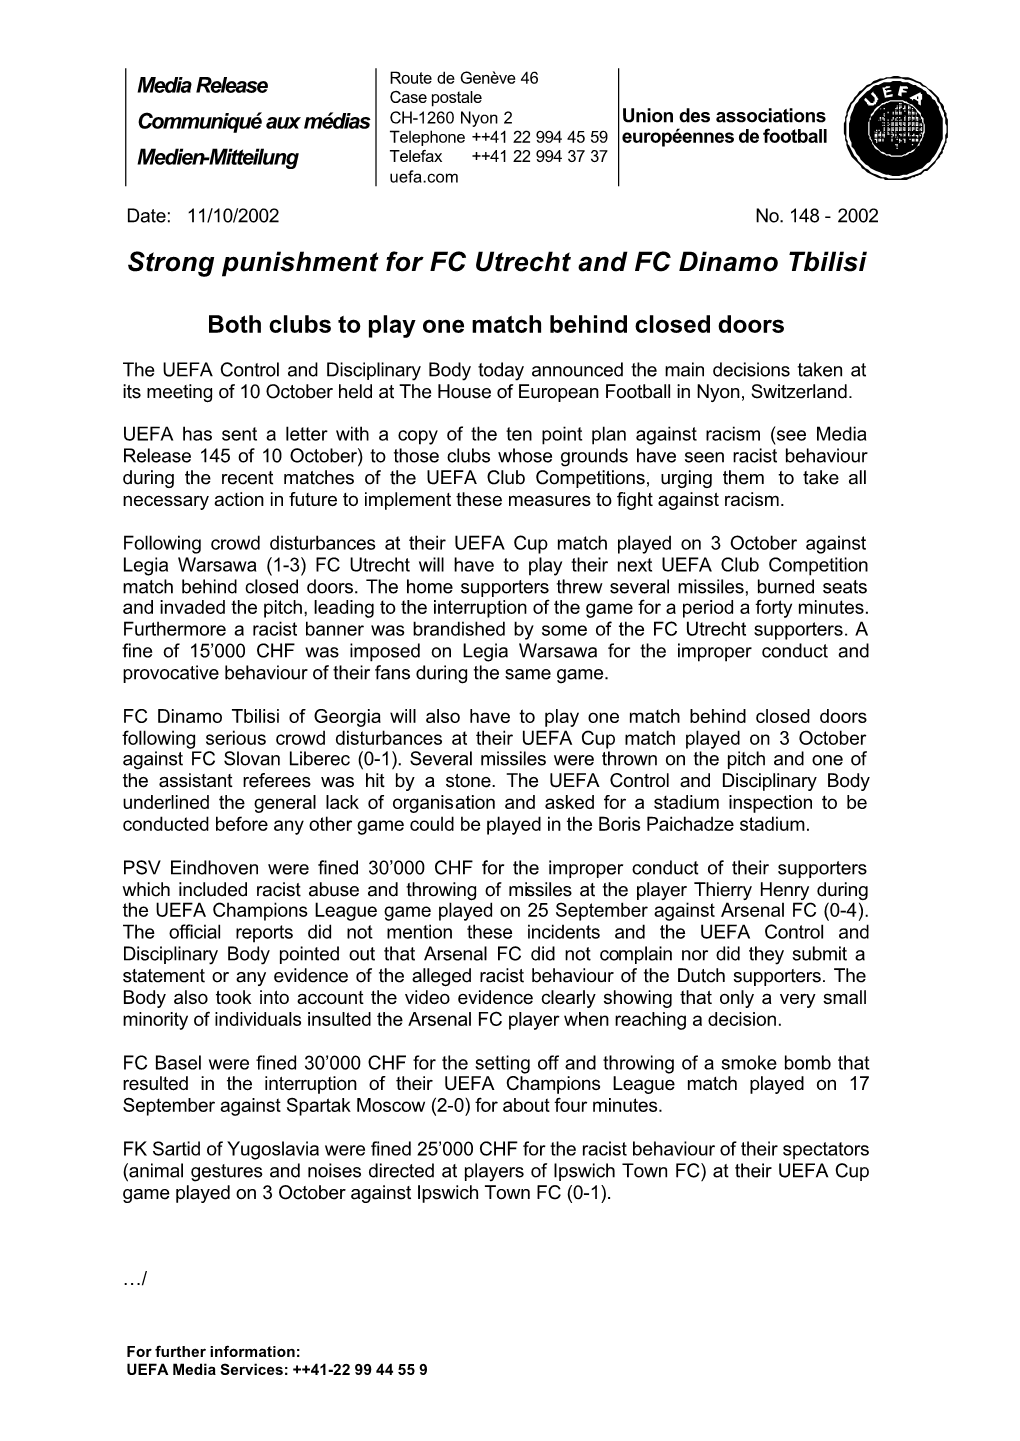 Strong Punishment for FC Utrecht and FC Dinamo Tbilisi